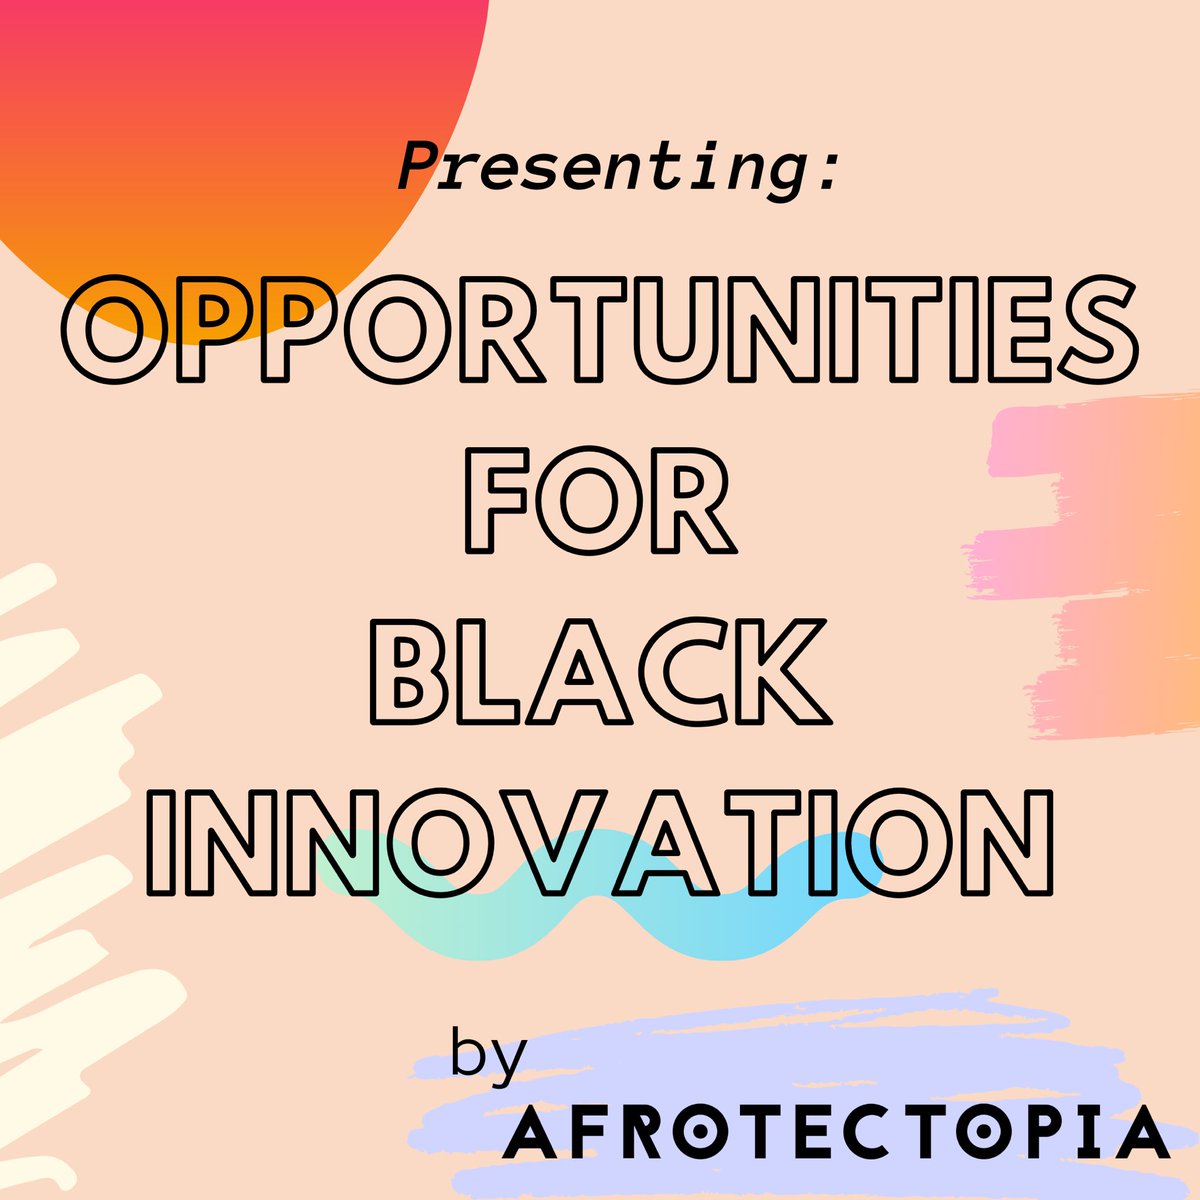 We are excited to announce a few new opportunitities for Black innovators!